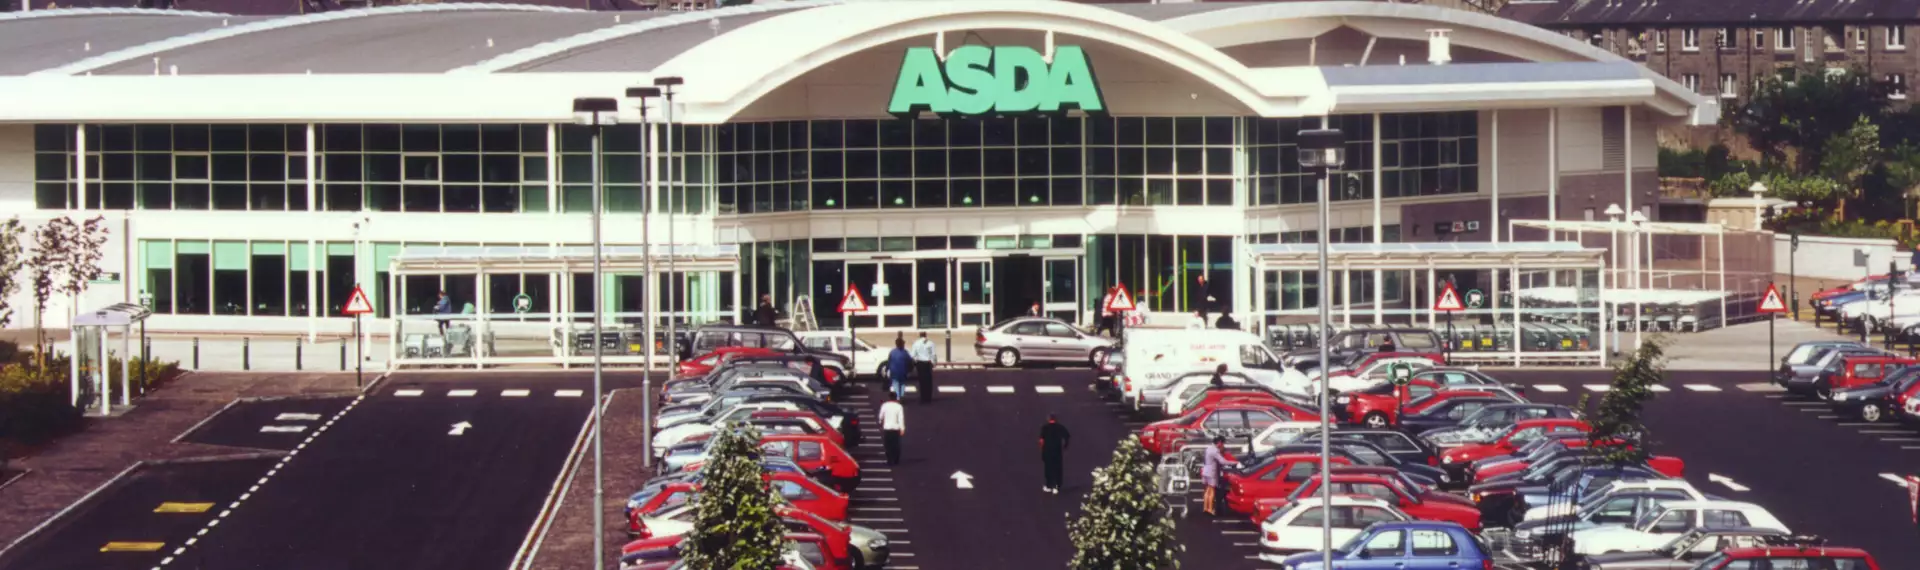 Older Asda store exterior and late 80's-90's cars in the car park